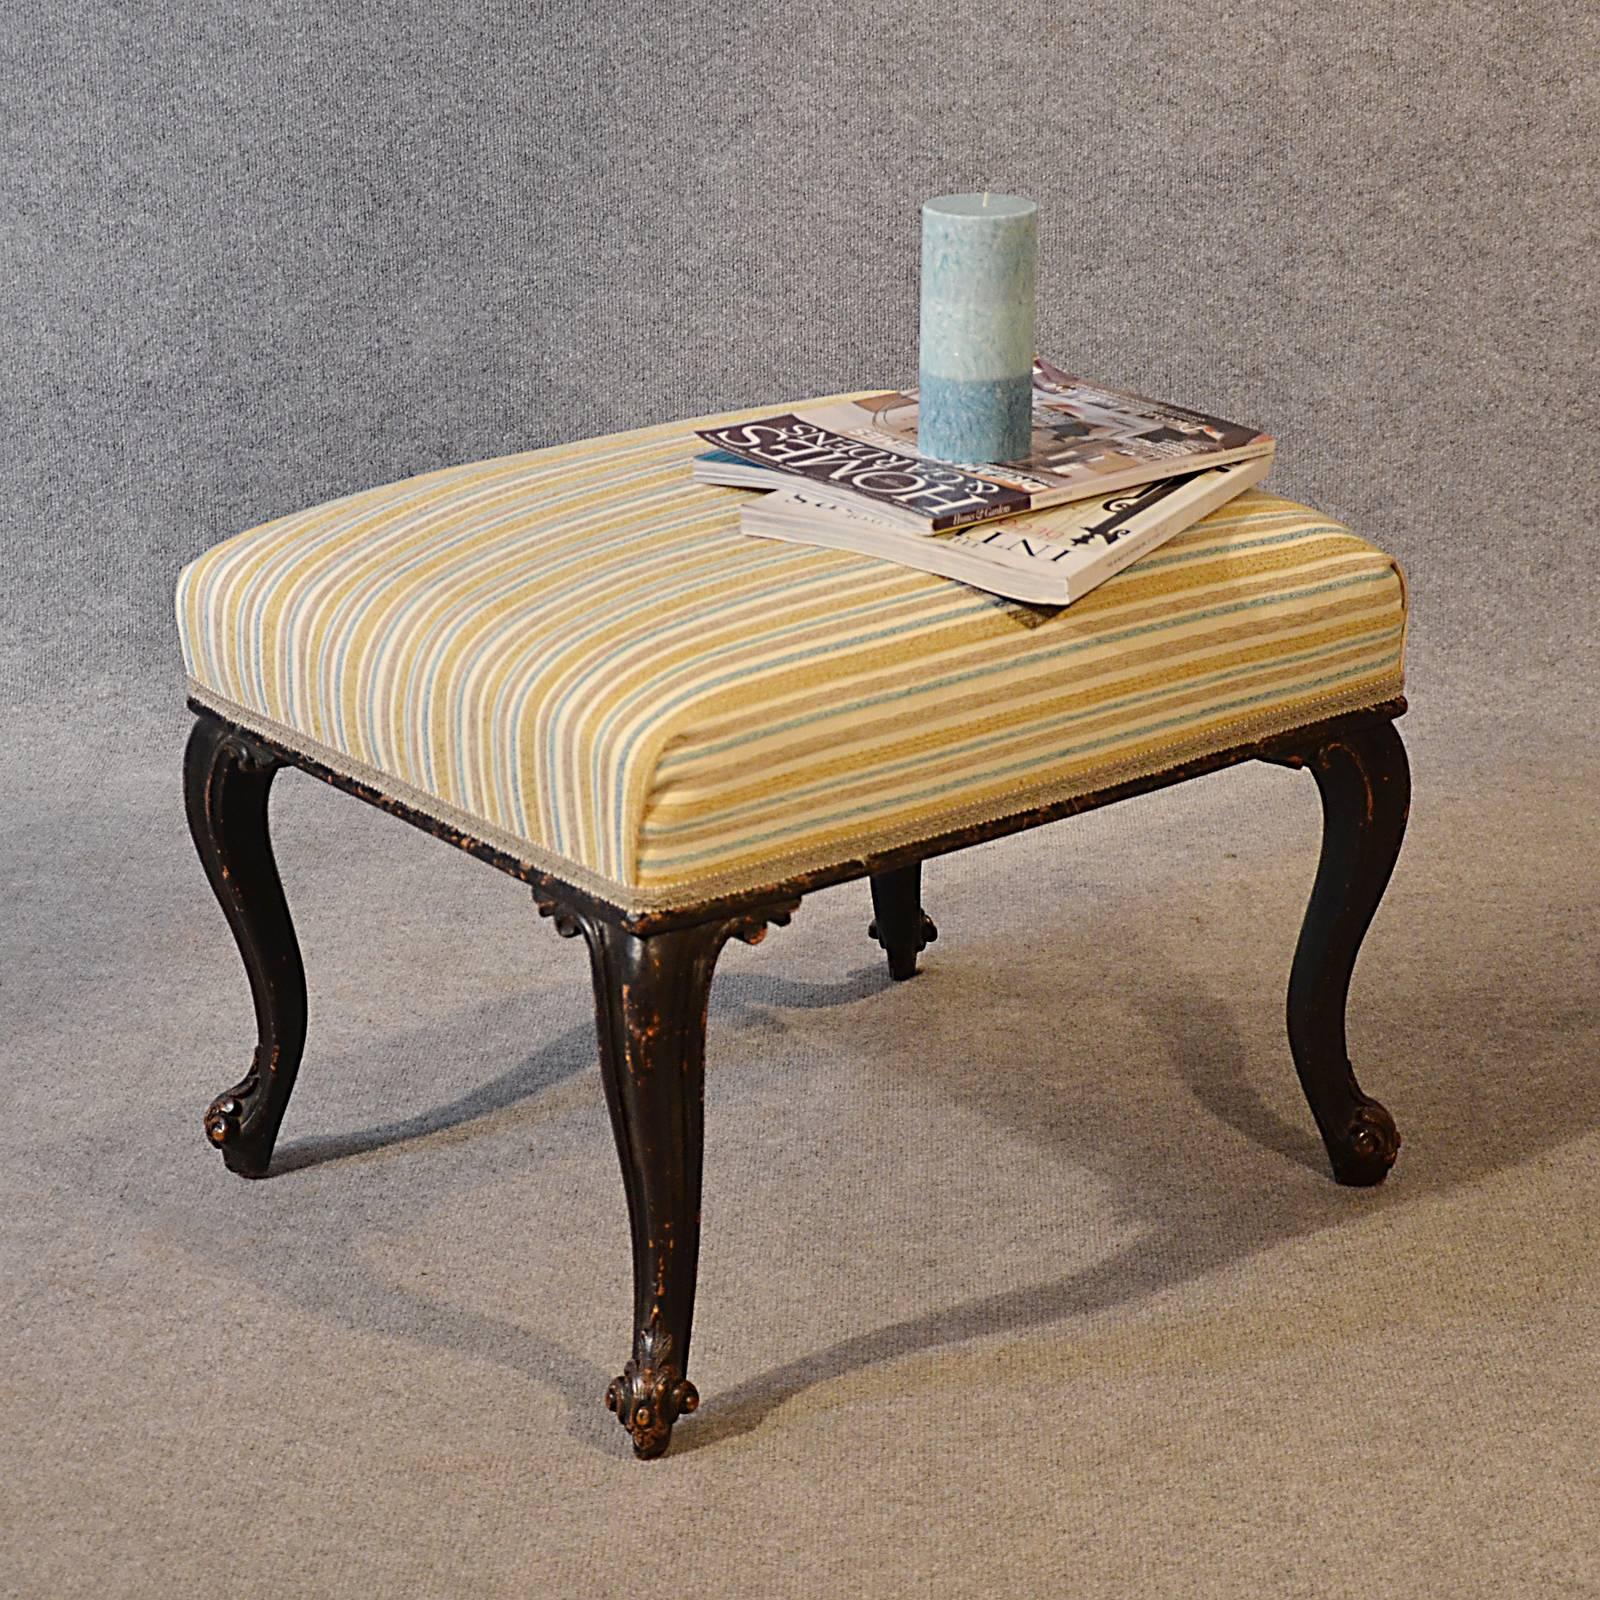 This lovely cabriole legged English Victorian dressing stool is presented in very good condition with solid frame and joints.
Standing upon wonderfully shaped moulded tall cabriole legs and offering a useful 48cm (18.9